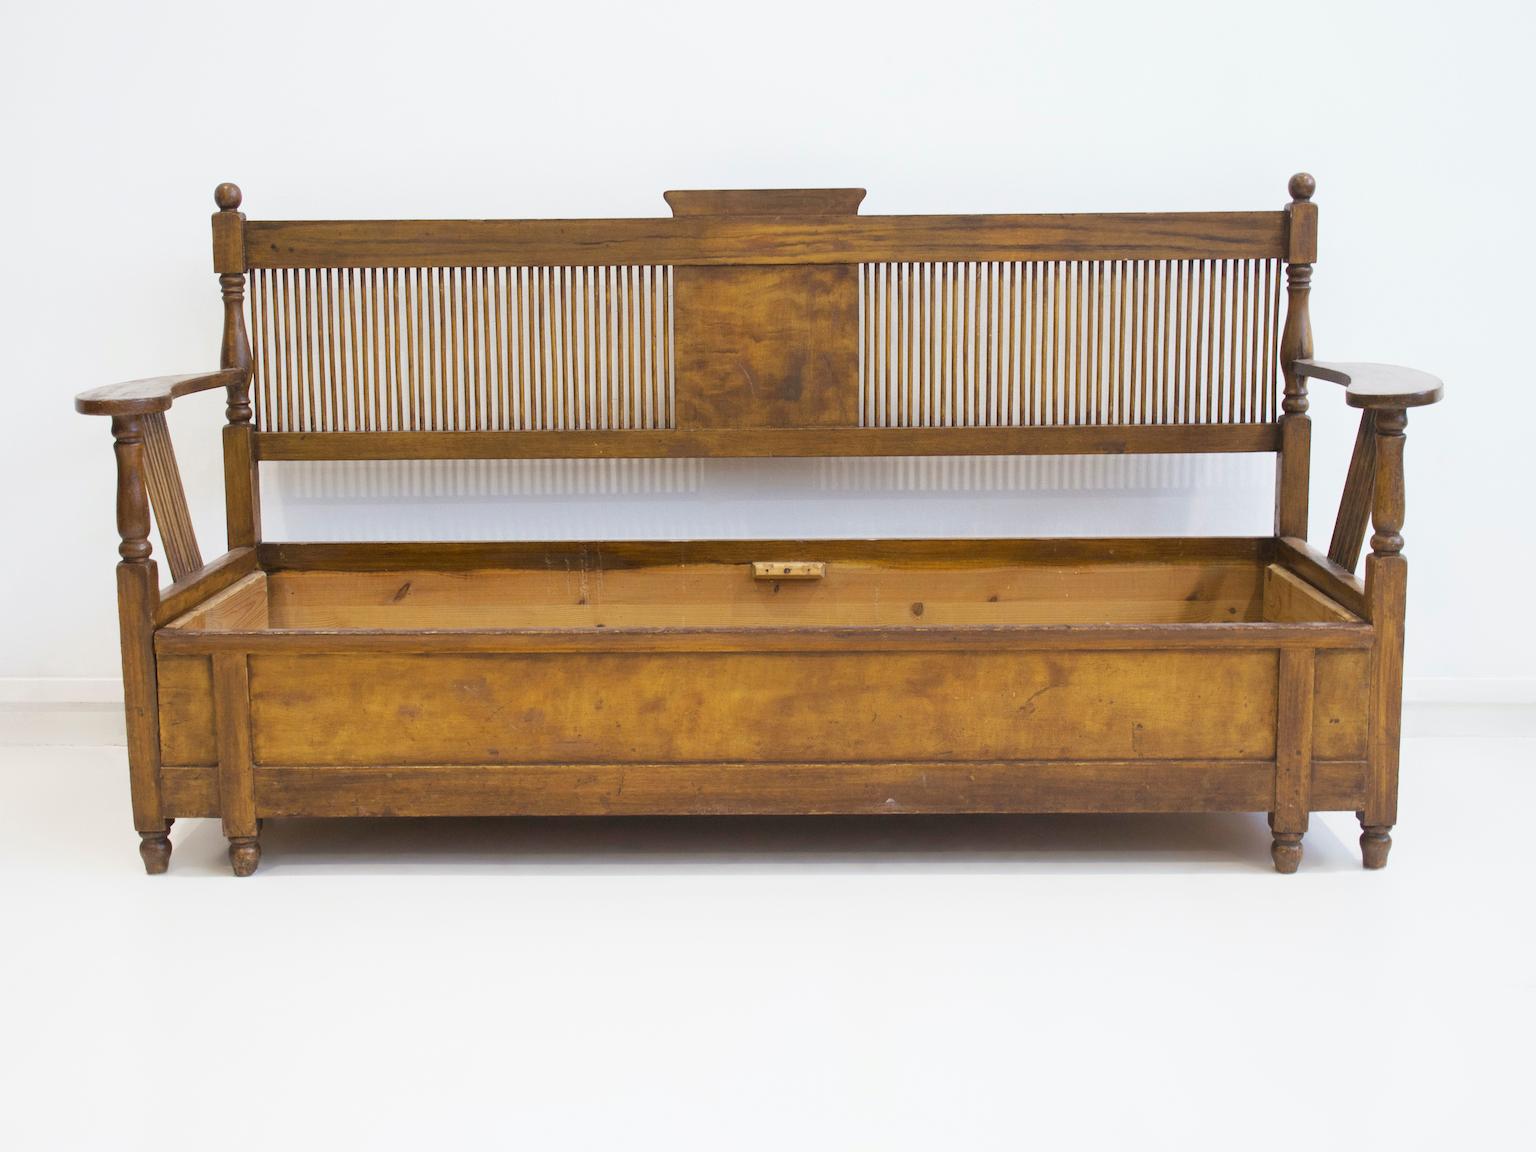 Stained wood sofa designed in 1899 by Carl Westman. Model 